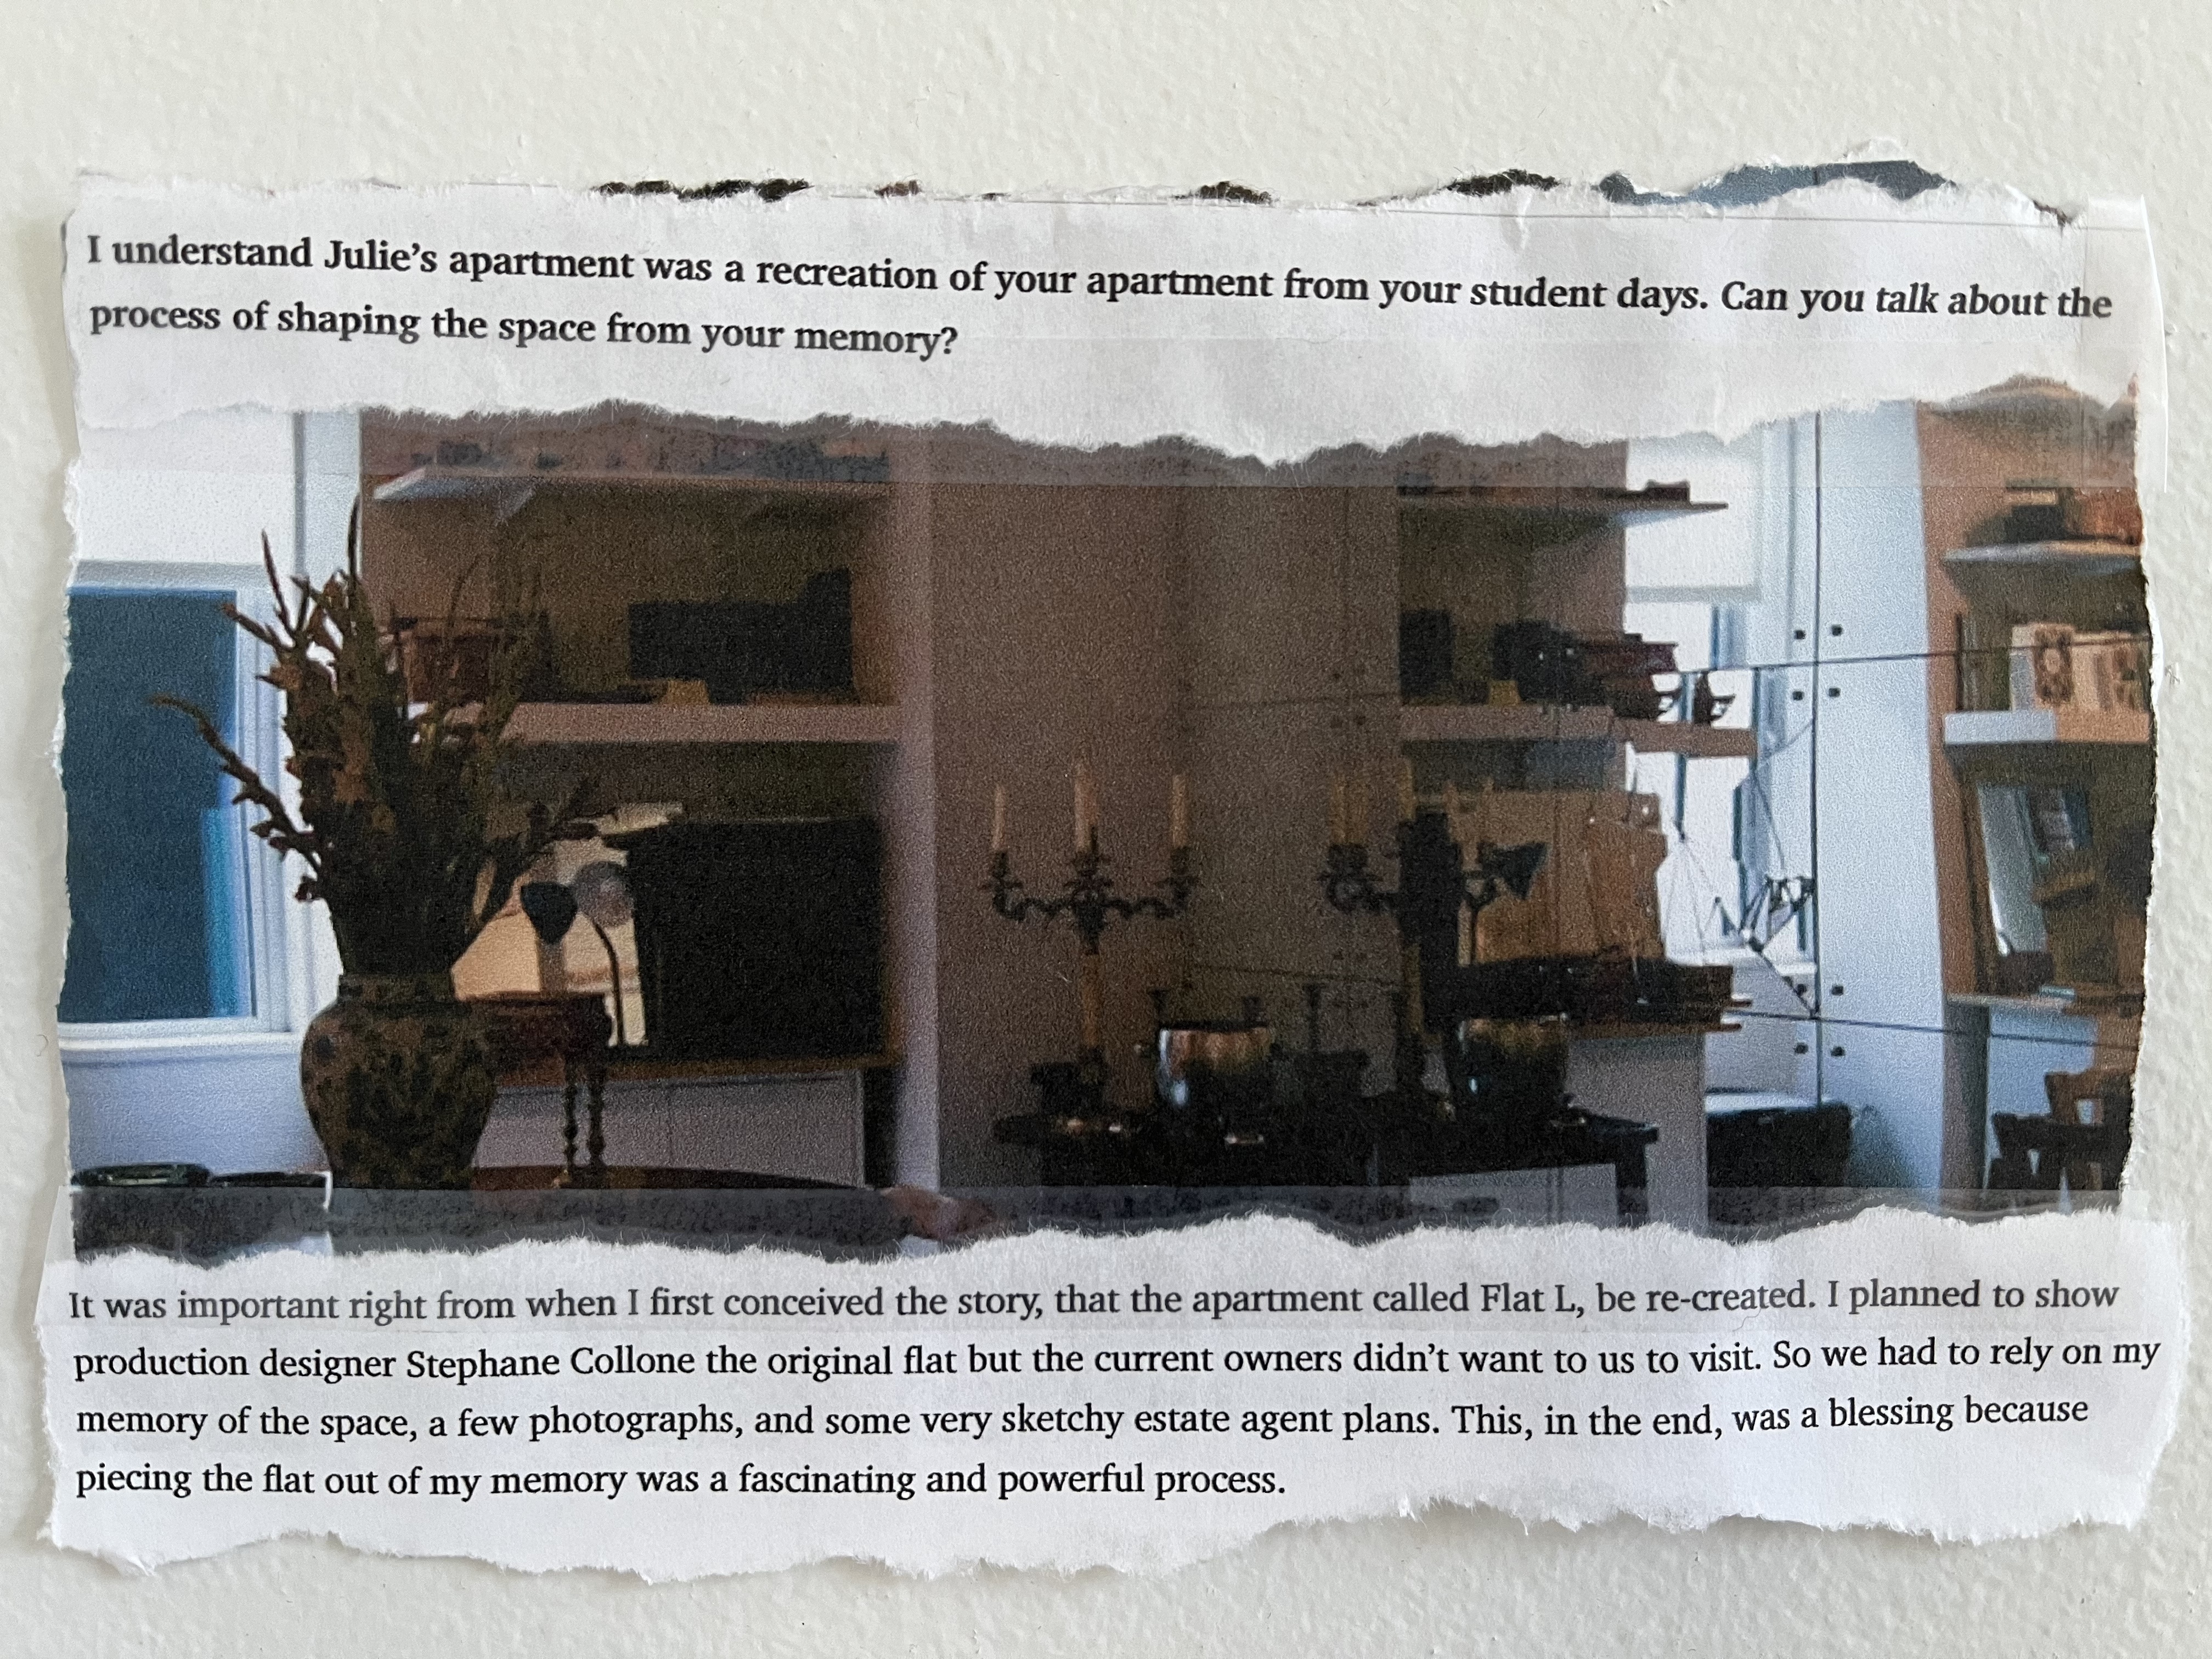 Another section of the magazine article about The Souvenir is taped to the wall. An image shows a corner of a room, furnished with tables, shelves, and objects including a candlestick and vase. The text, part of an interview with Joanna Hogg, reads:

Interviewer: I understand Julie's apartment was a recreation of your apartment from your student days. Can you talk about the process of shaping the space from your memory?

Hogg: It was important right from when I first conceived the story, that the apartment called Flat L, be re-created. I planned to show production designer Stephane Collone the original flat but the current owners didn't want us to visit. So we had to rely on my memory of the space, a few photographs, and some very sketchy estate agent plans. This, in the end, was a blessing because piecing the flat out of my memory was a fascinating and powerful process. 